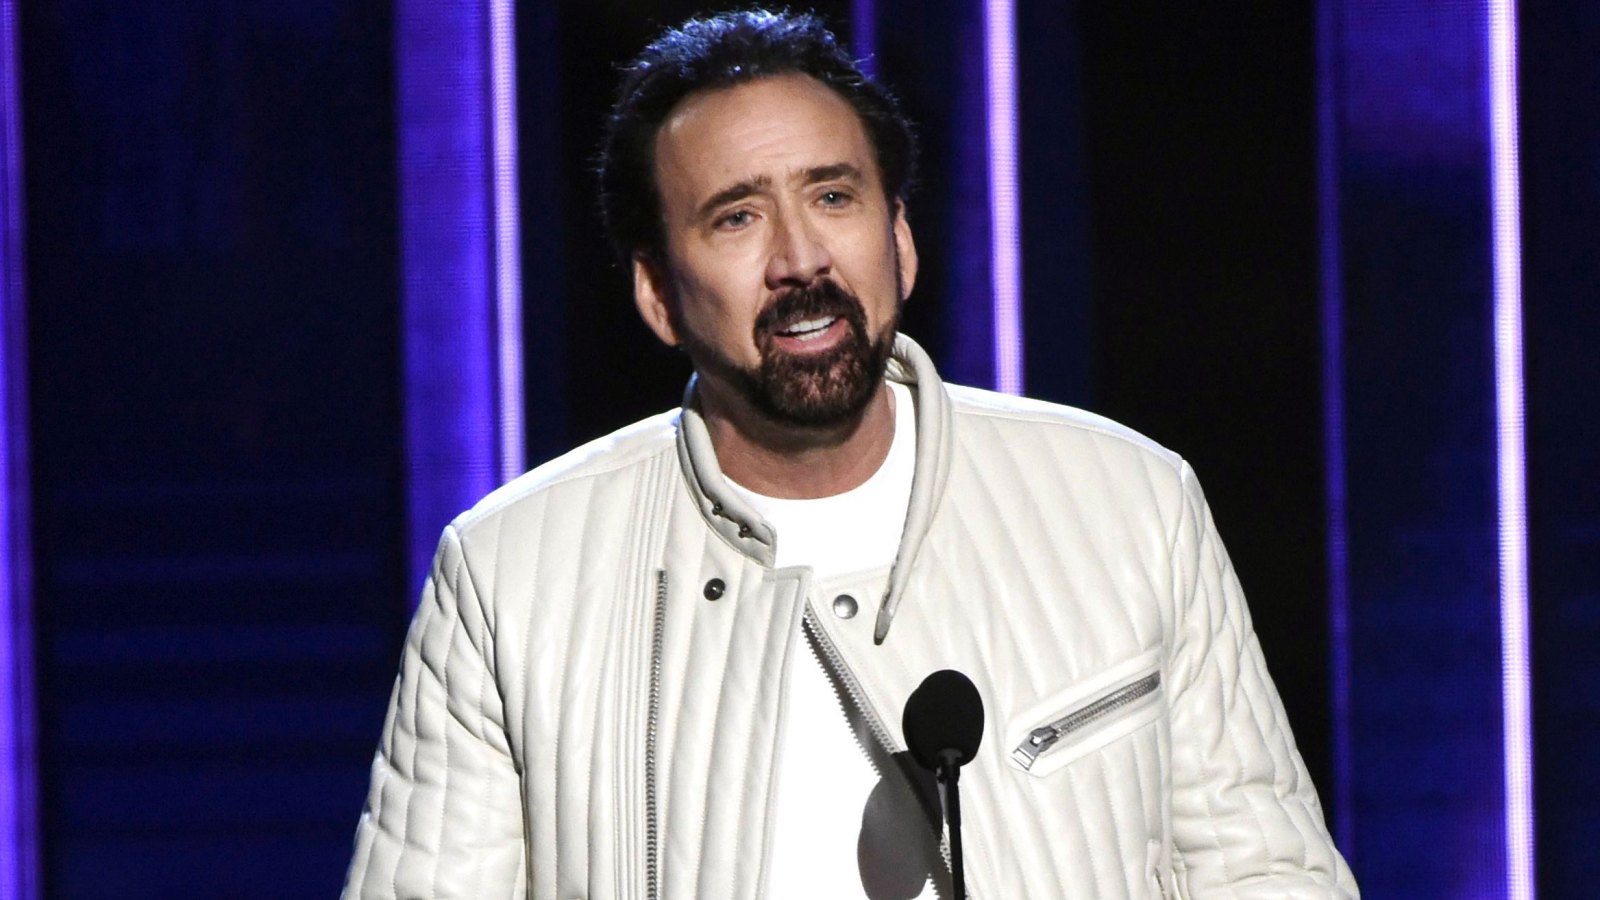 Nicolas Cage Packs on PDA With Mystery Woman at Independent Spirit Awards